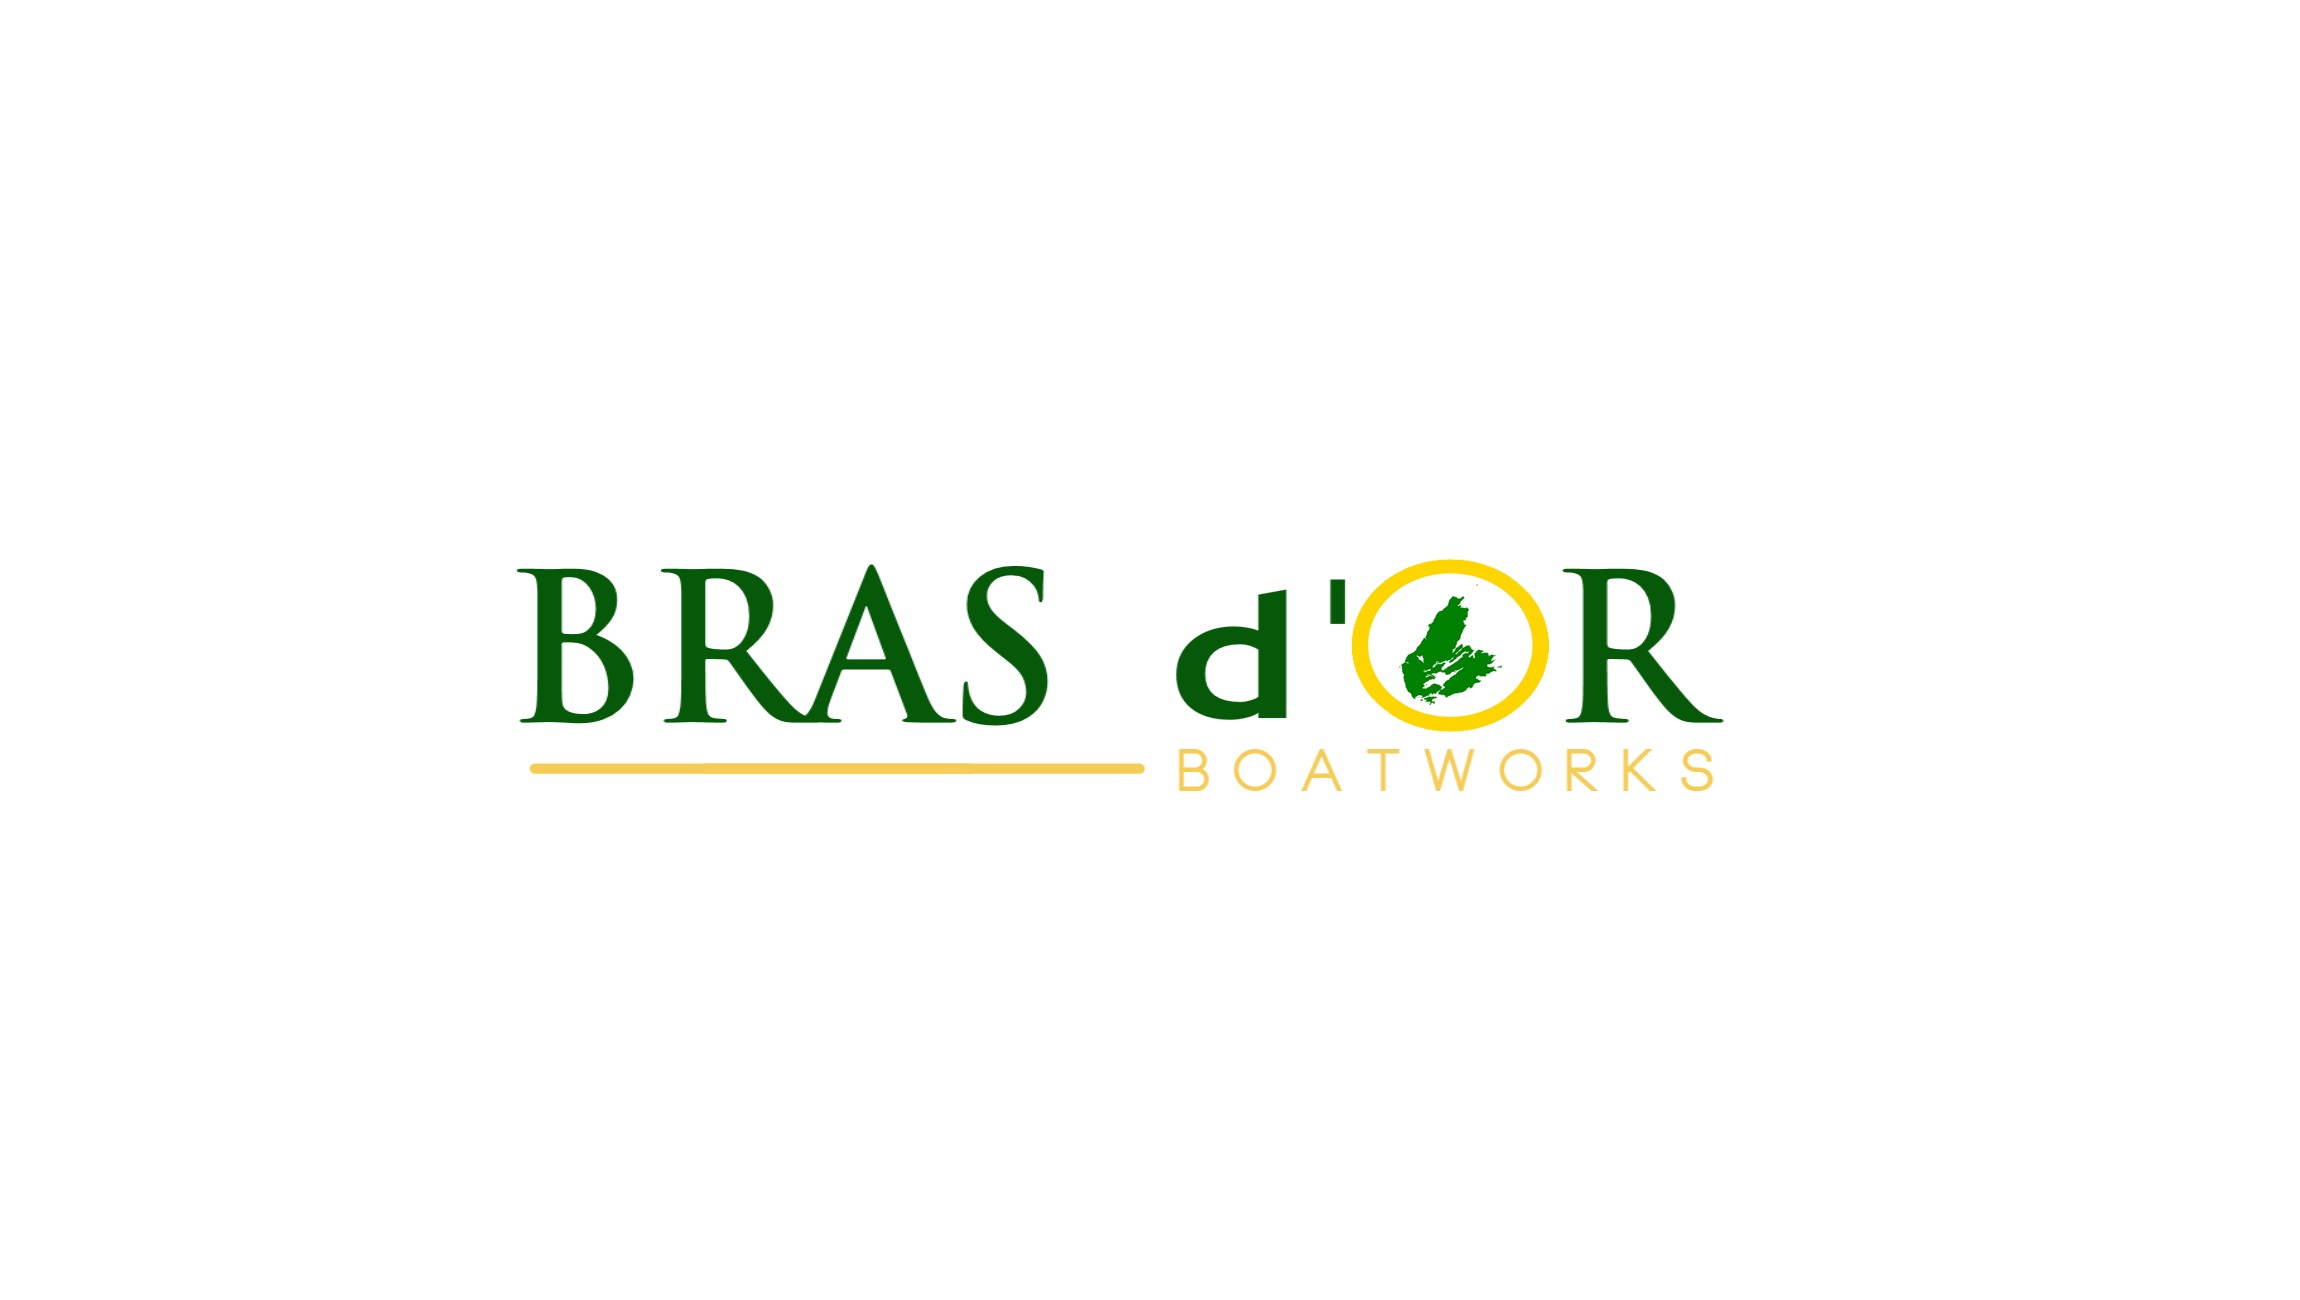 Small Boats – Bras d'Or Boatworks